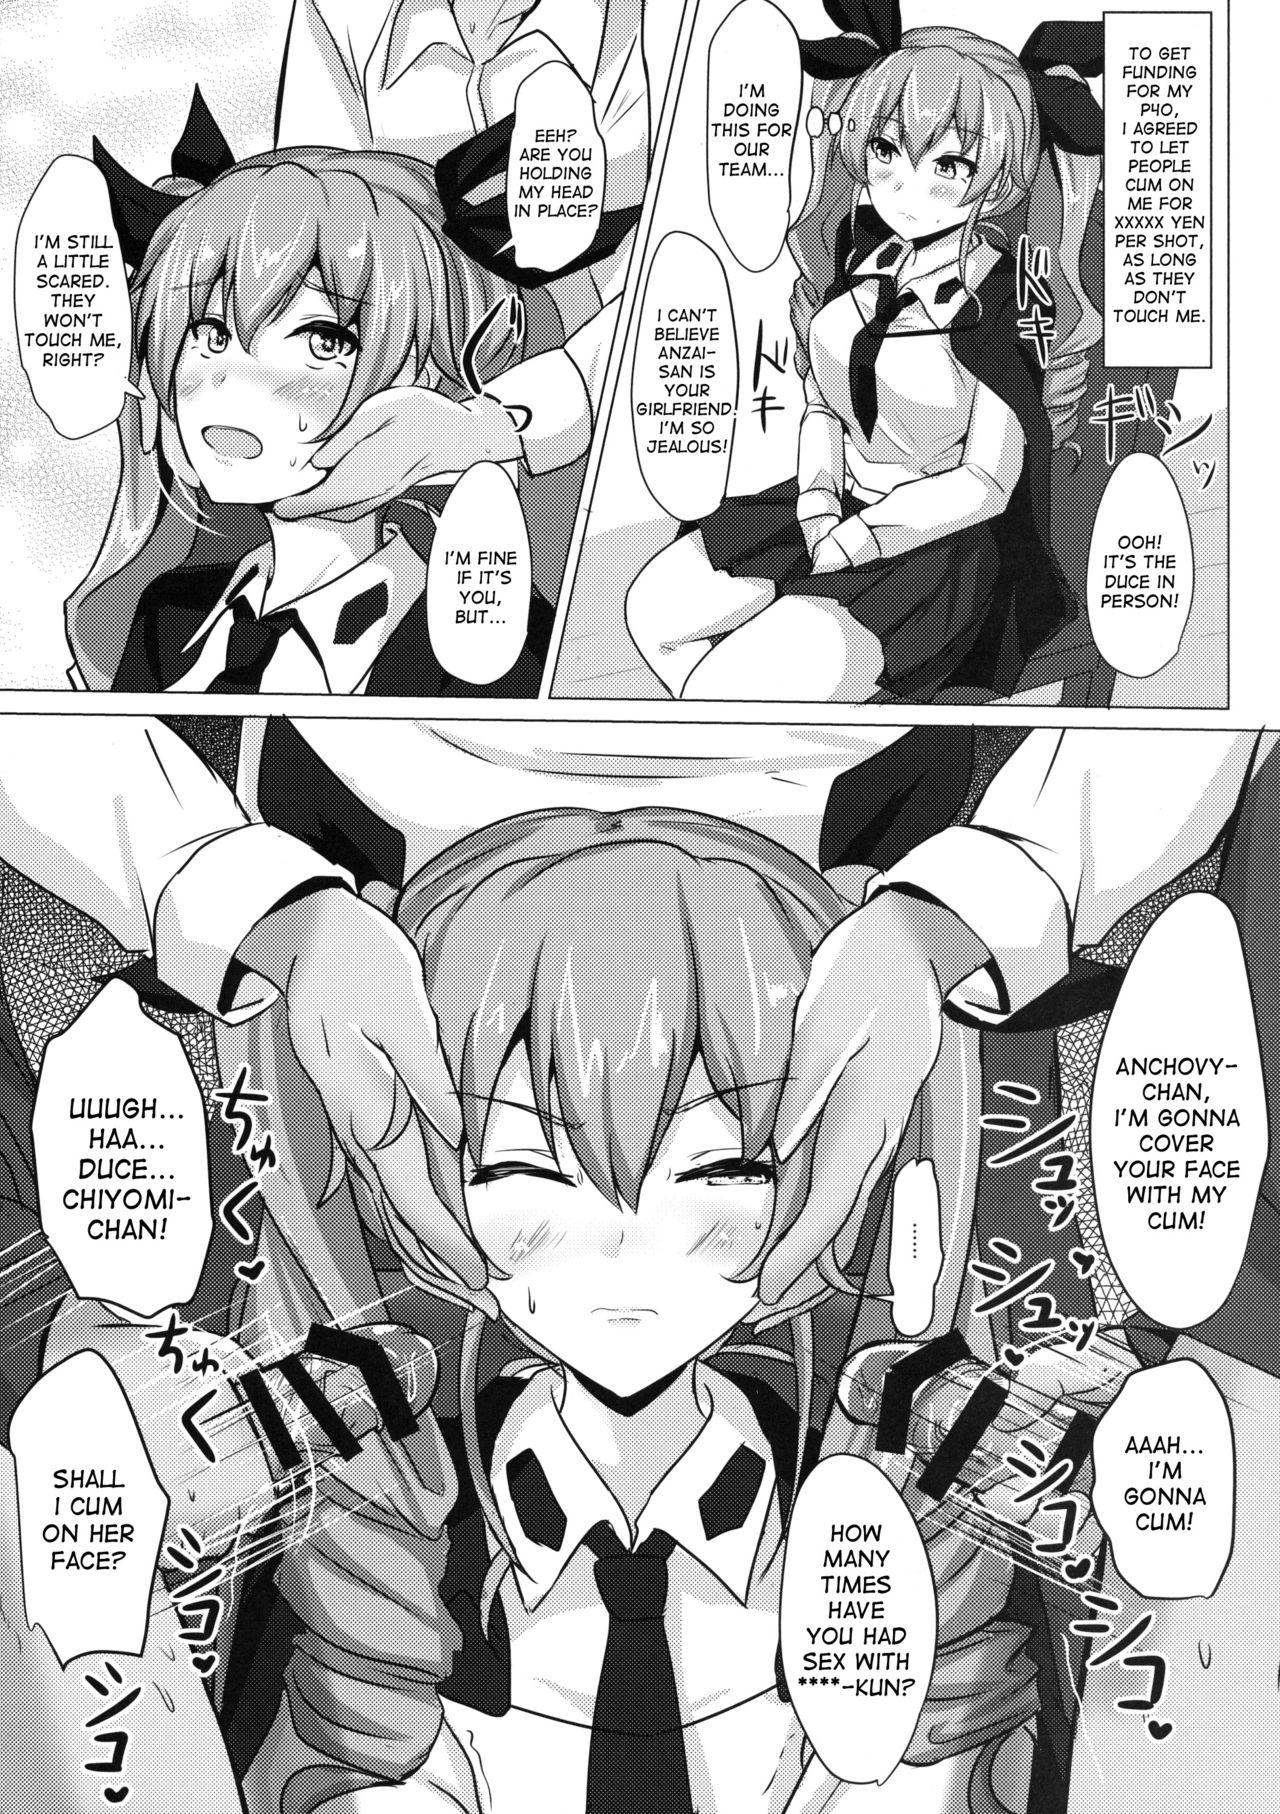 Polish Anchovy Nee-san White Sauce Zoe - Girls und panzer Office Sex - Page 7